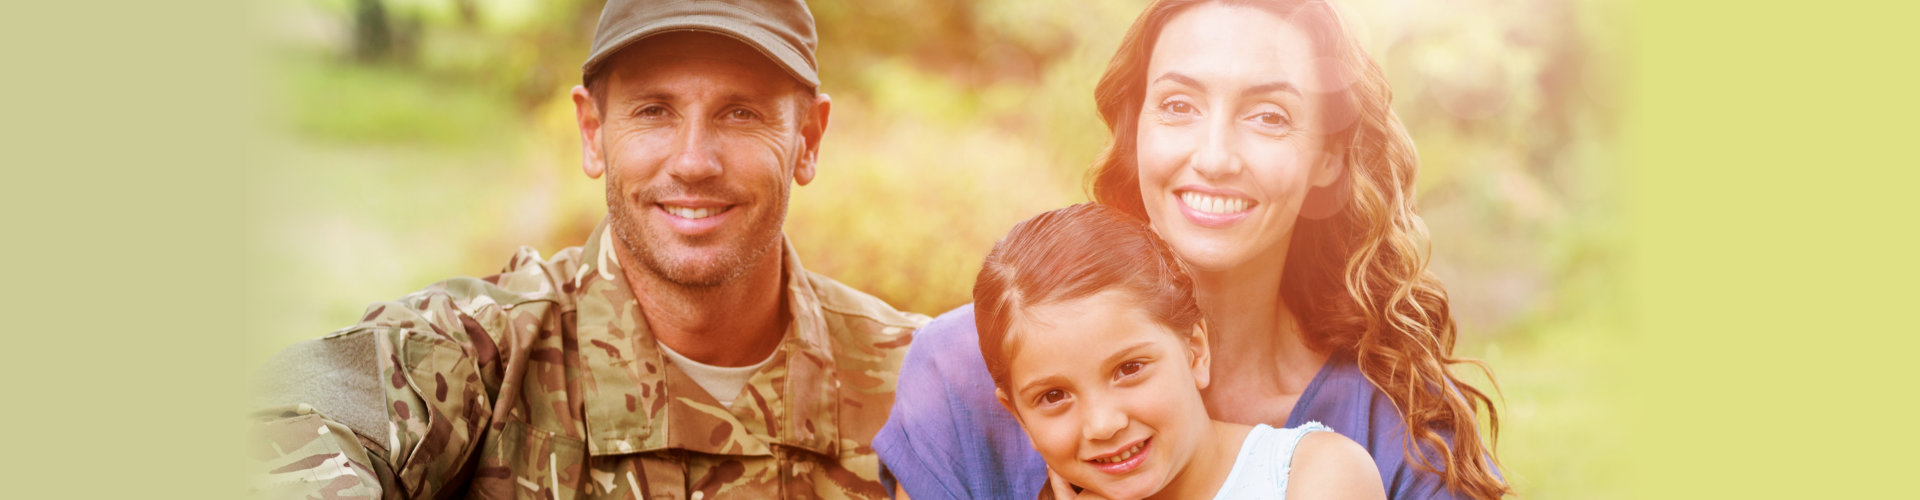 army man with family